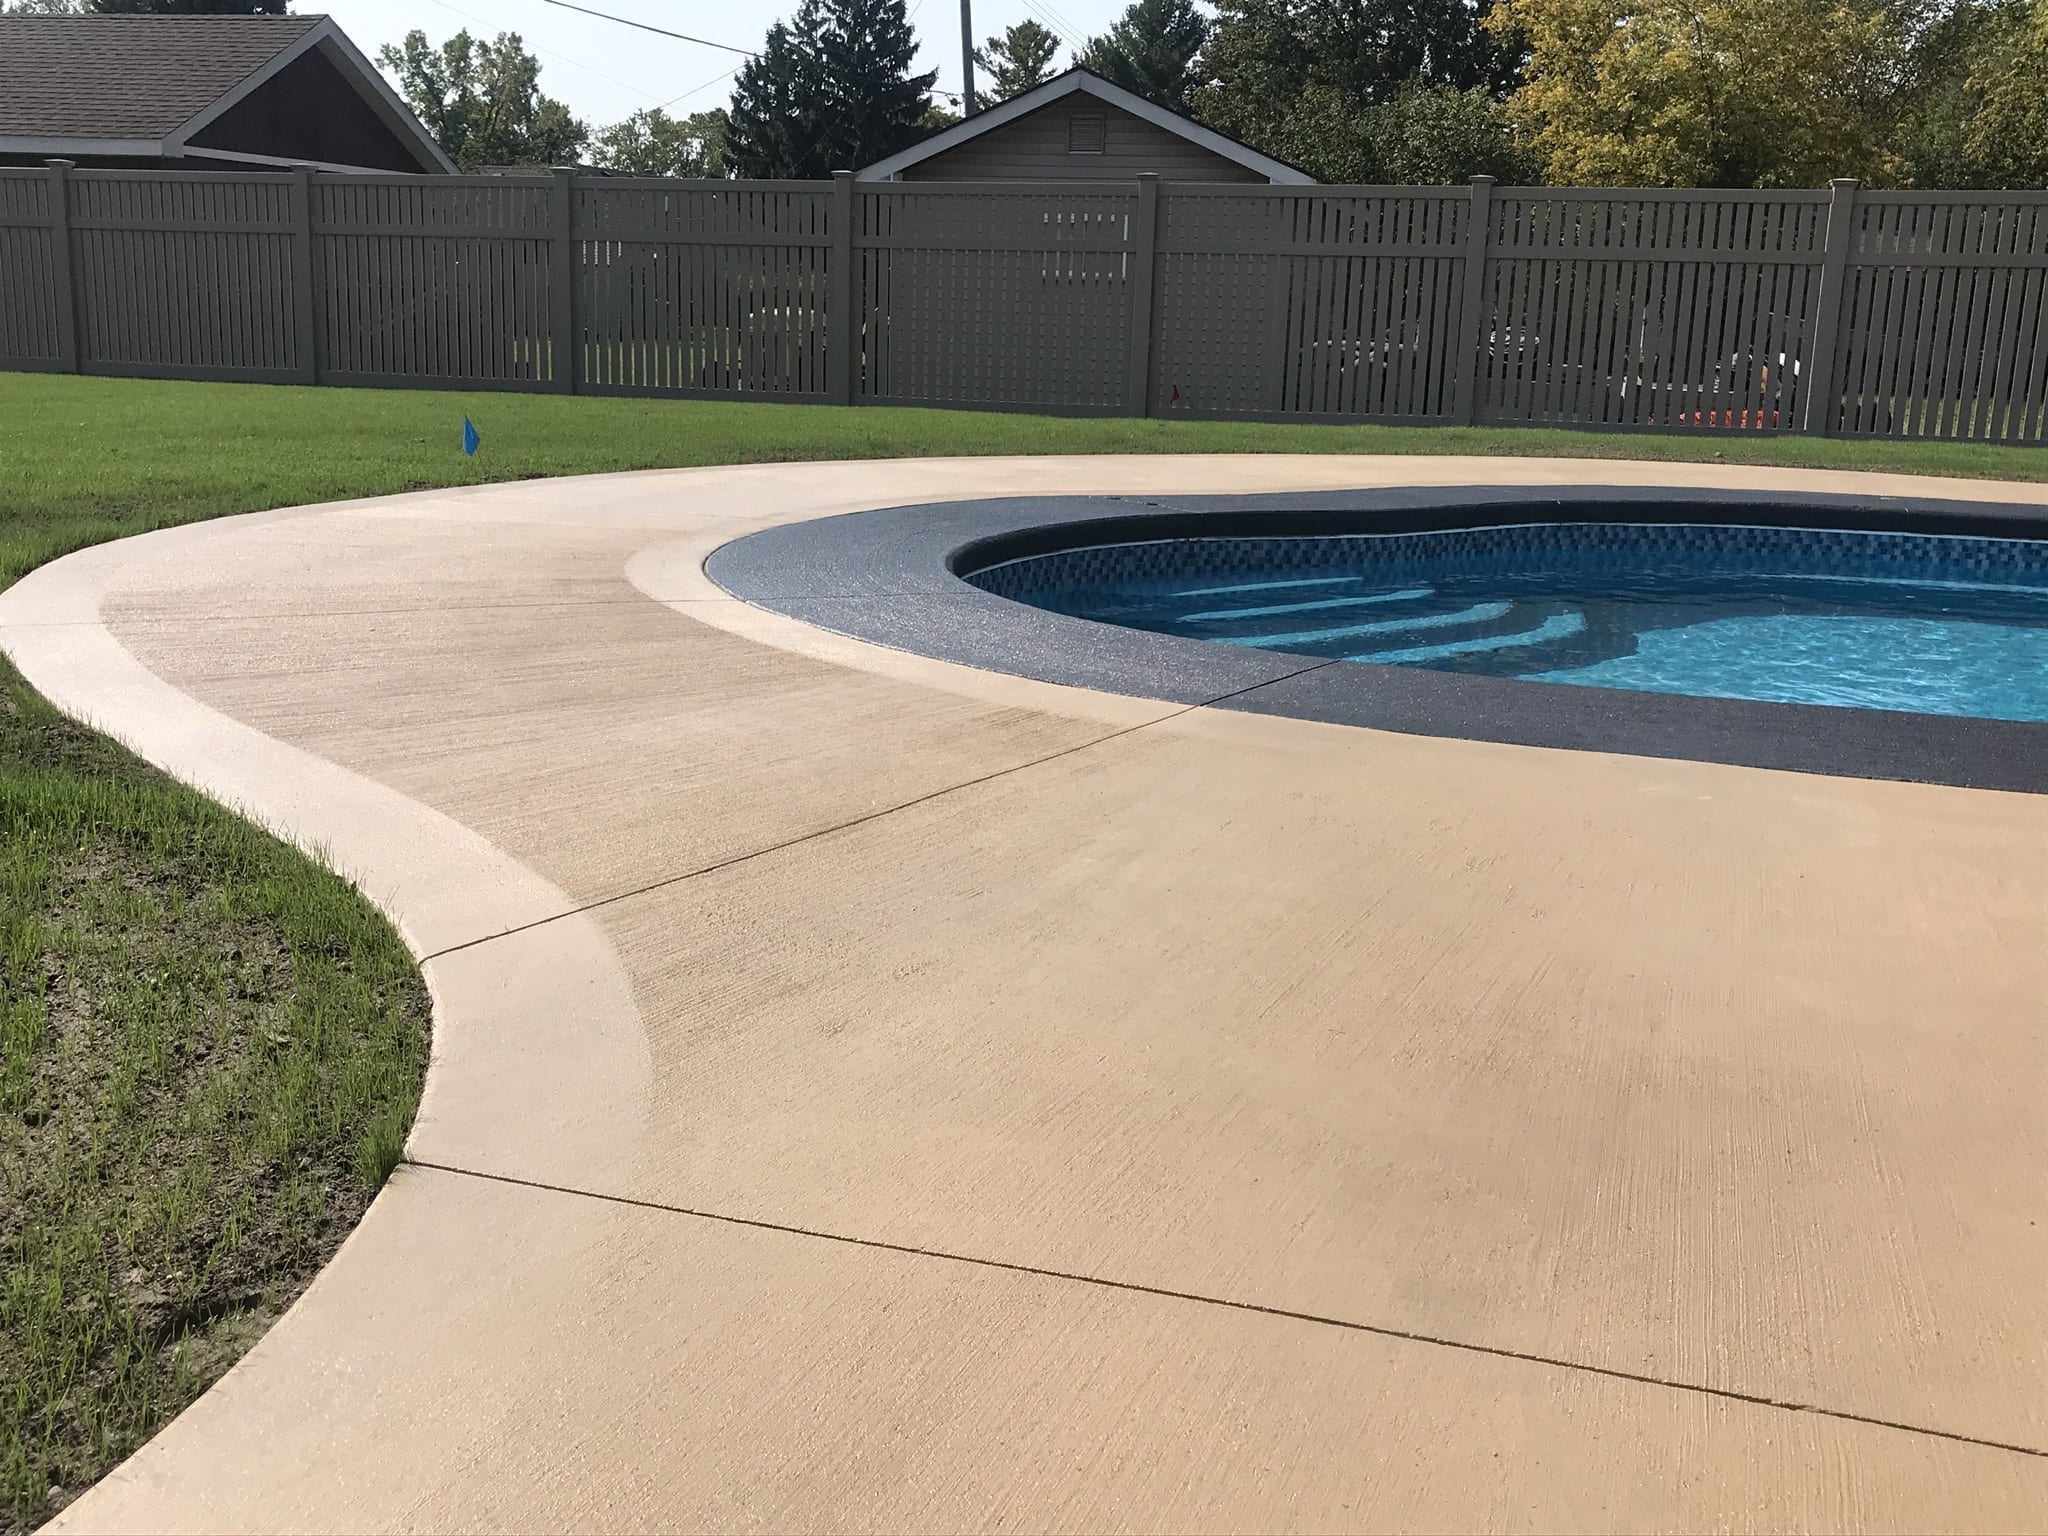 Khaki & Charcoal Stained Concrete Pool Deck